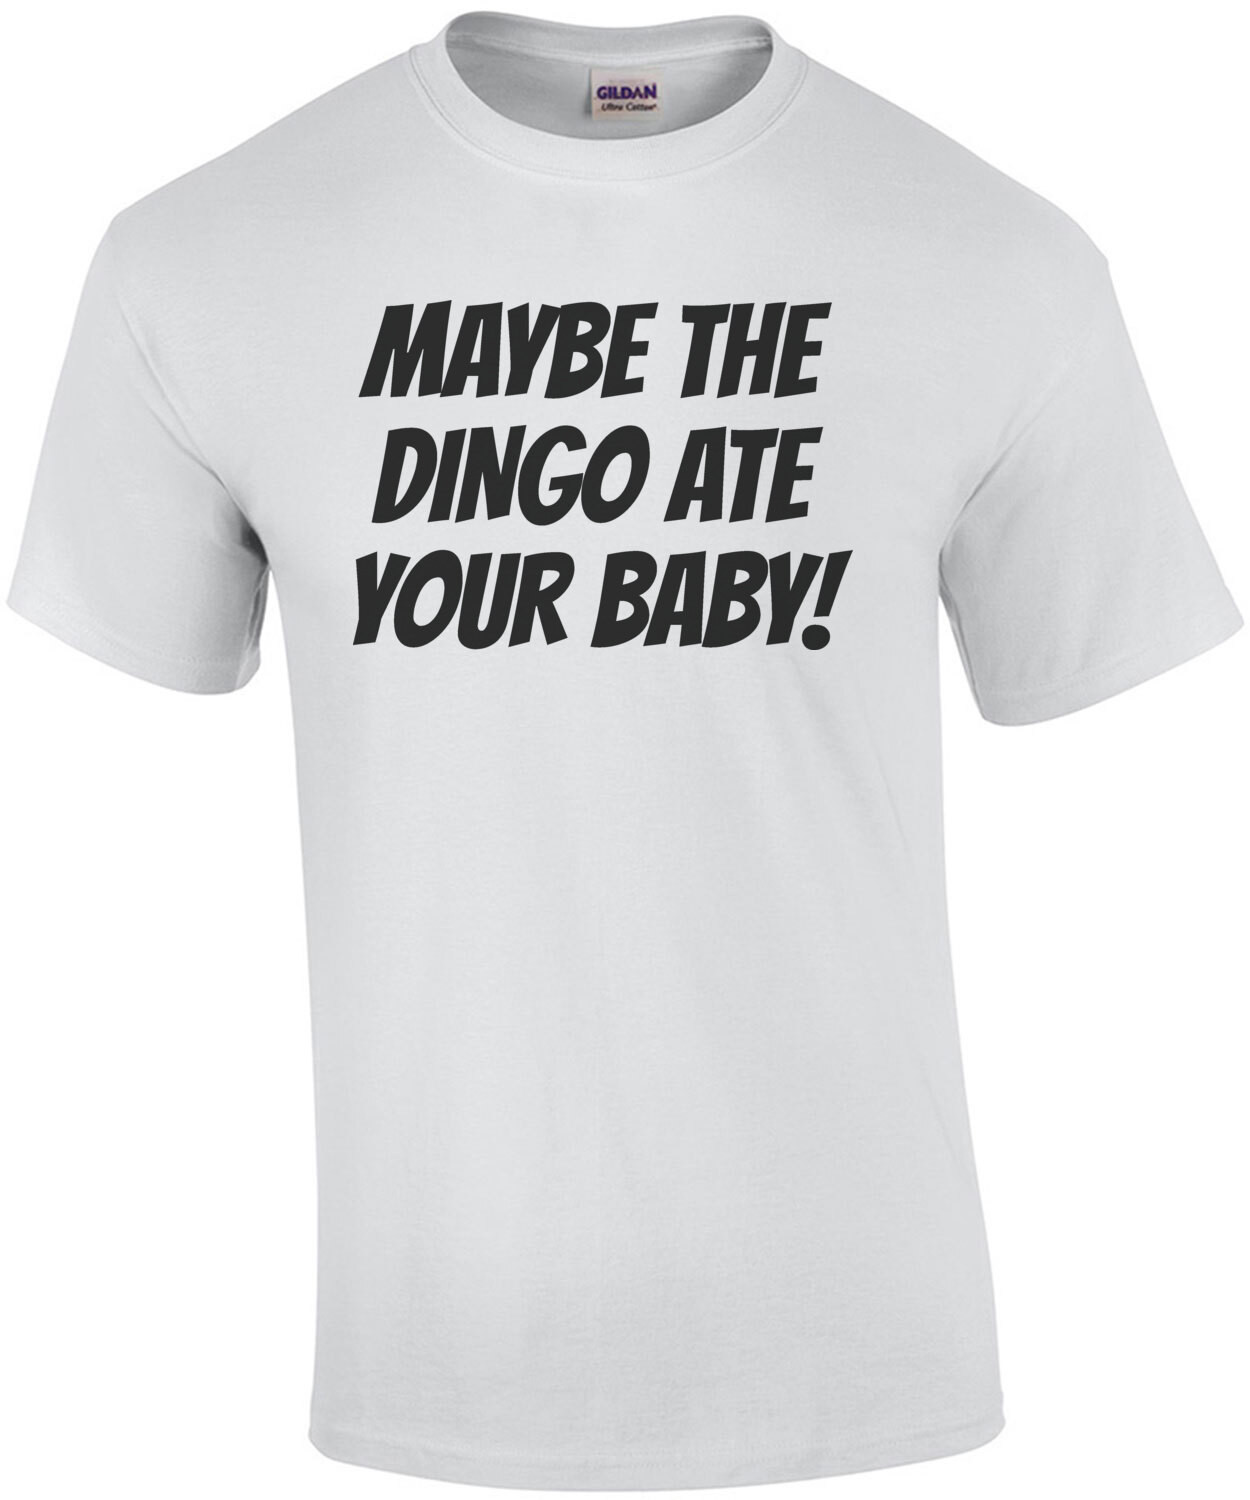 Maybe the dingo ate your baby - Elaine quote - funny Seinfeld 80's t-shirt